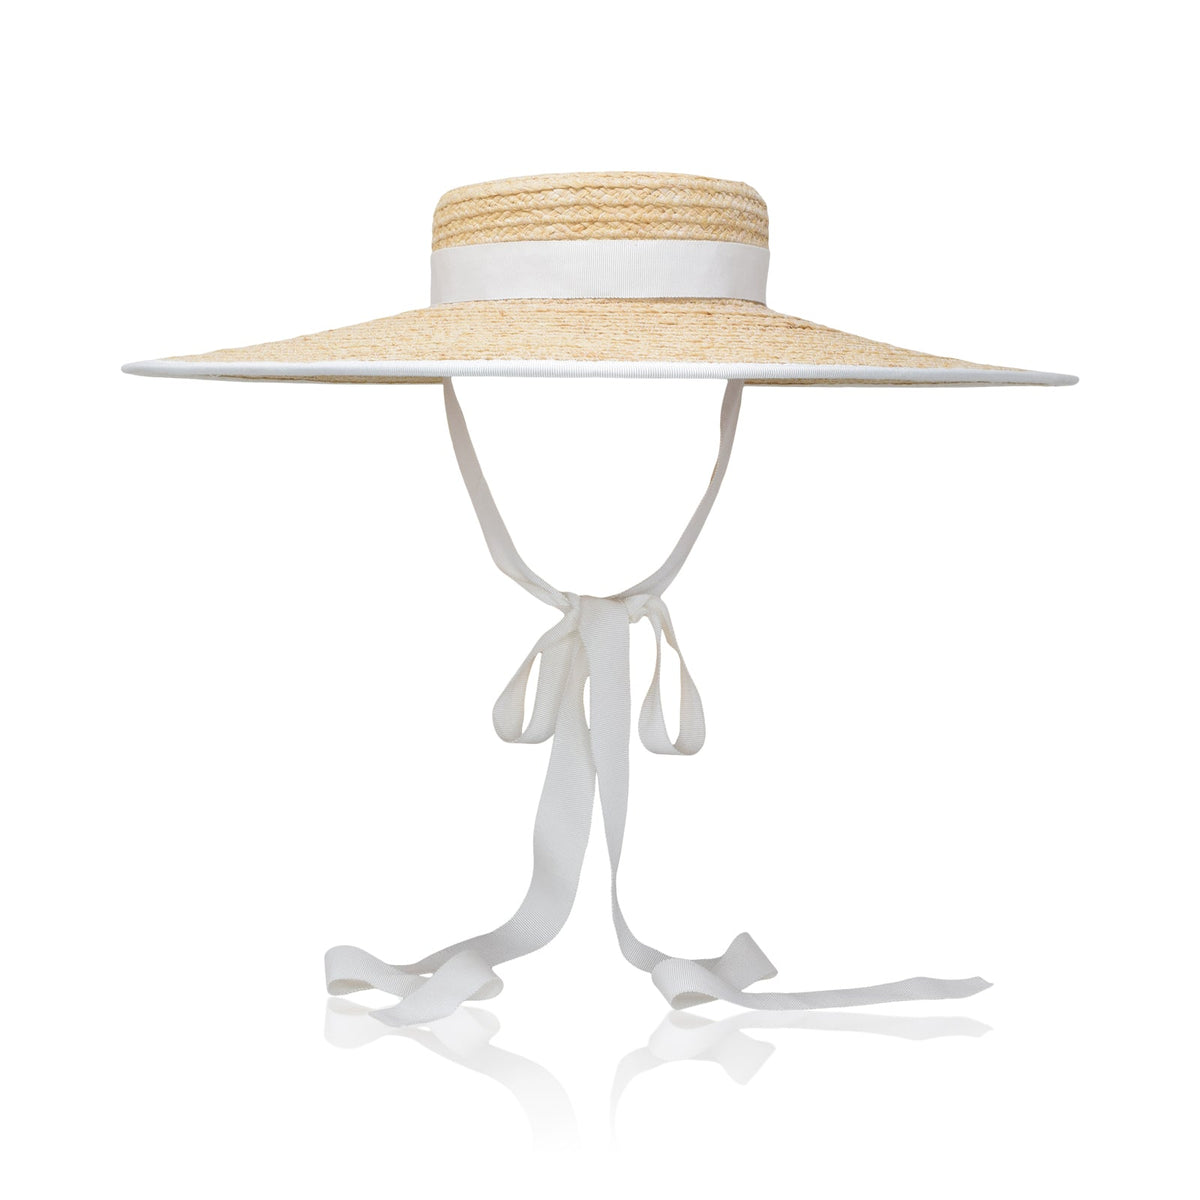 Claiborne Hat in Natural & Ivory